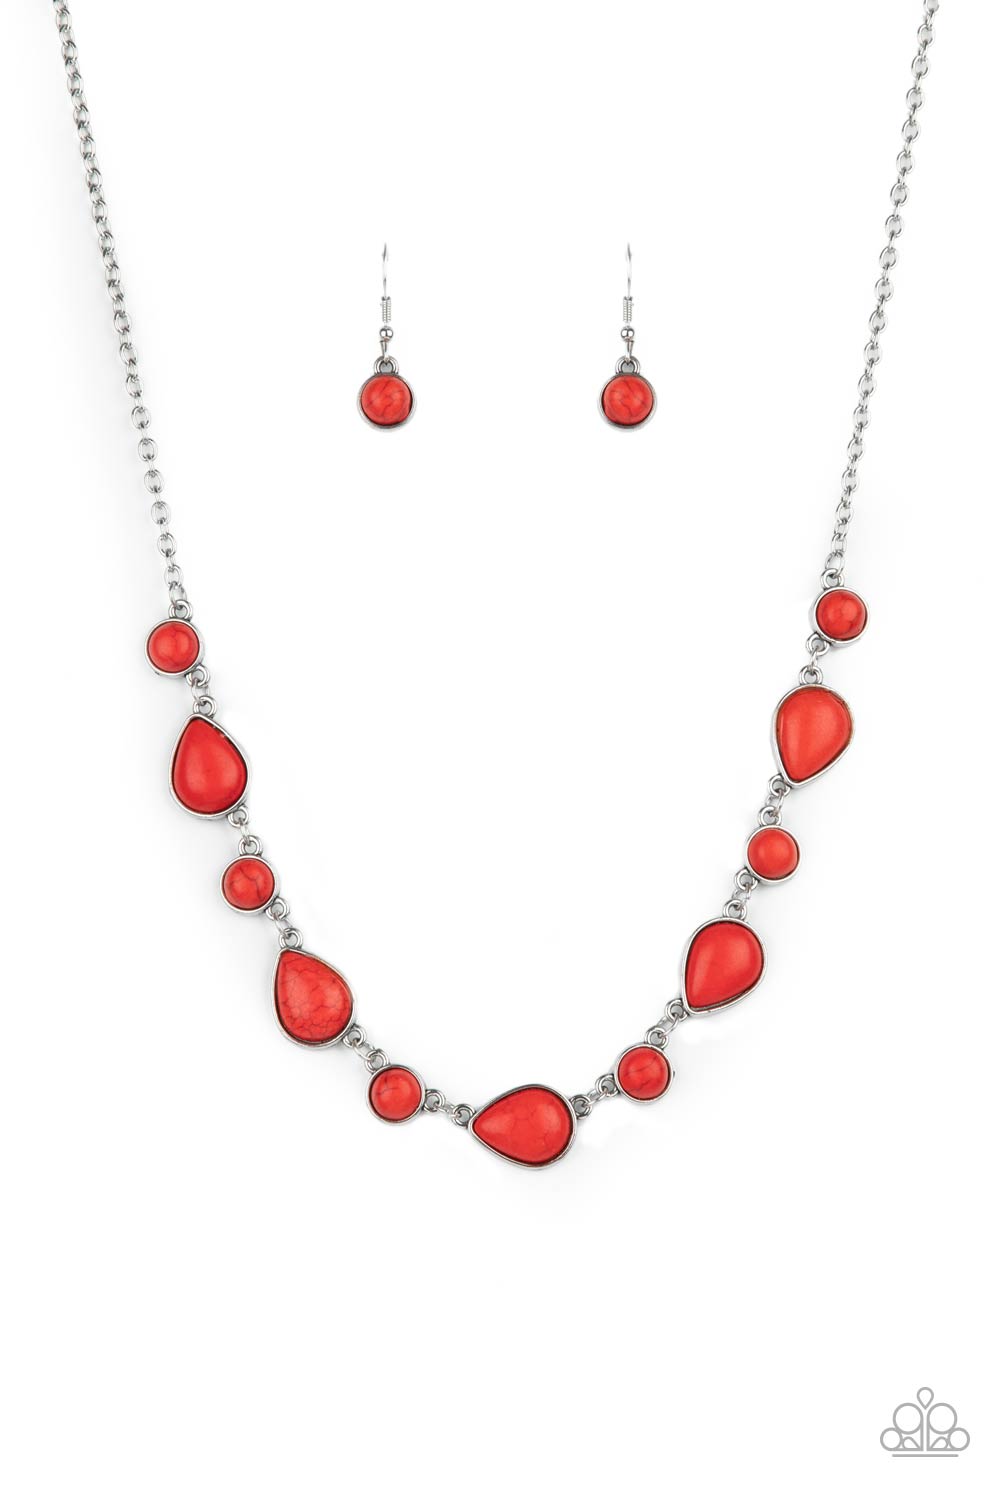 Paparazzi Necklace - Heavenly Teardrops - Red